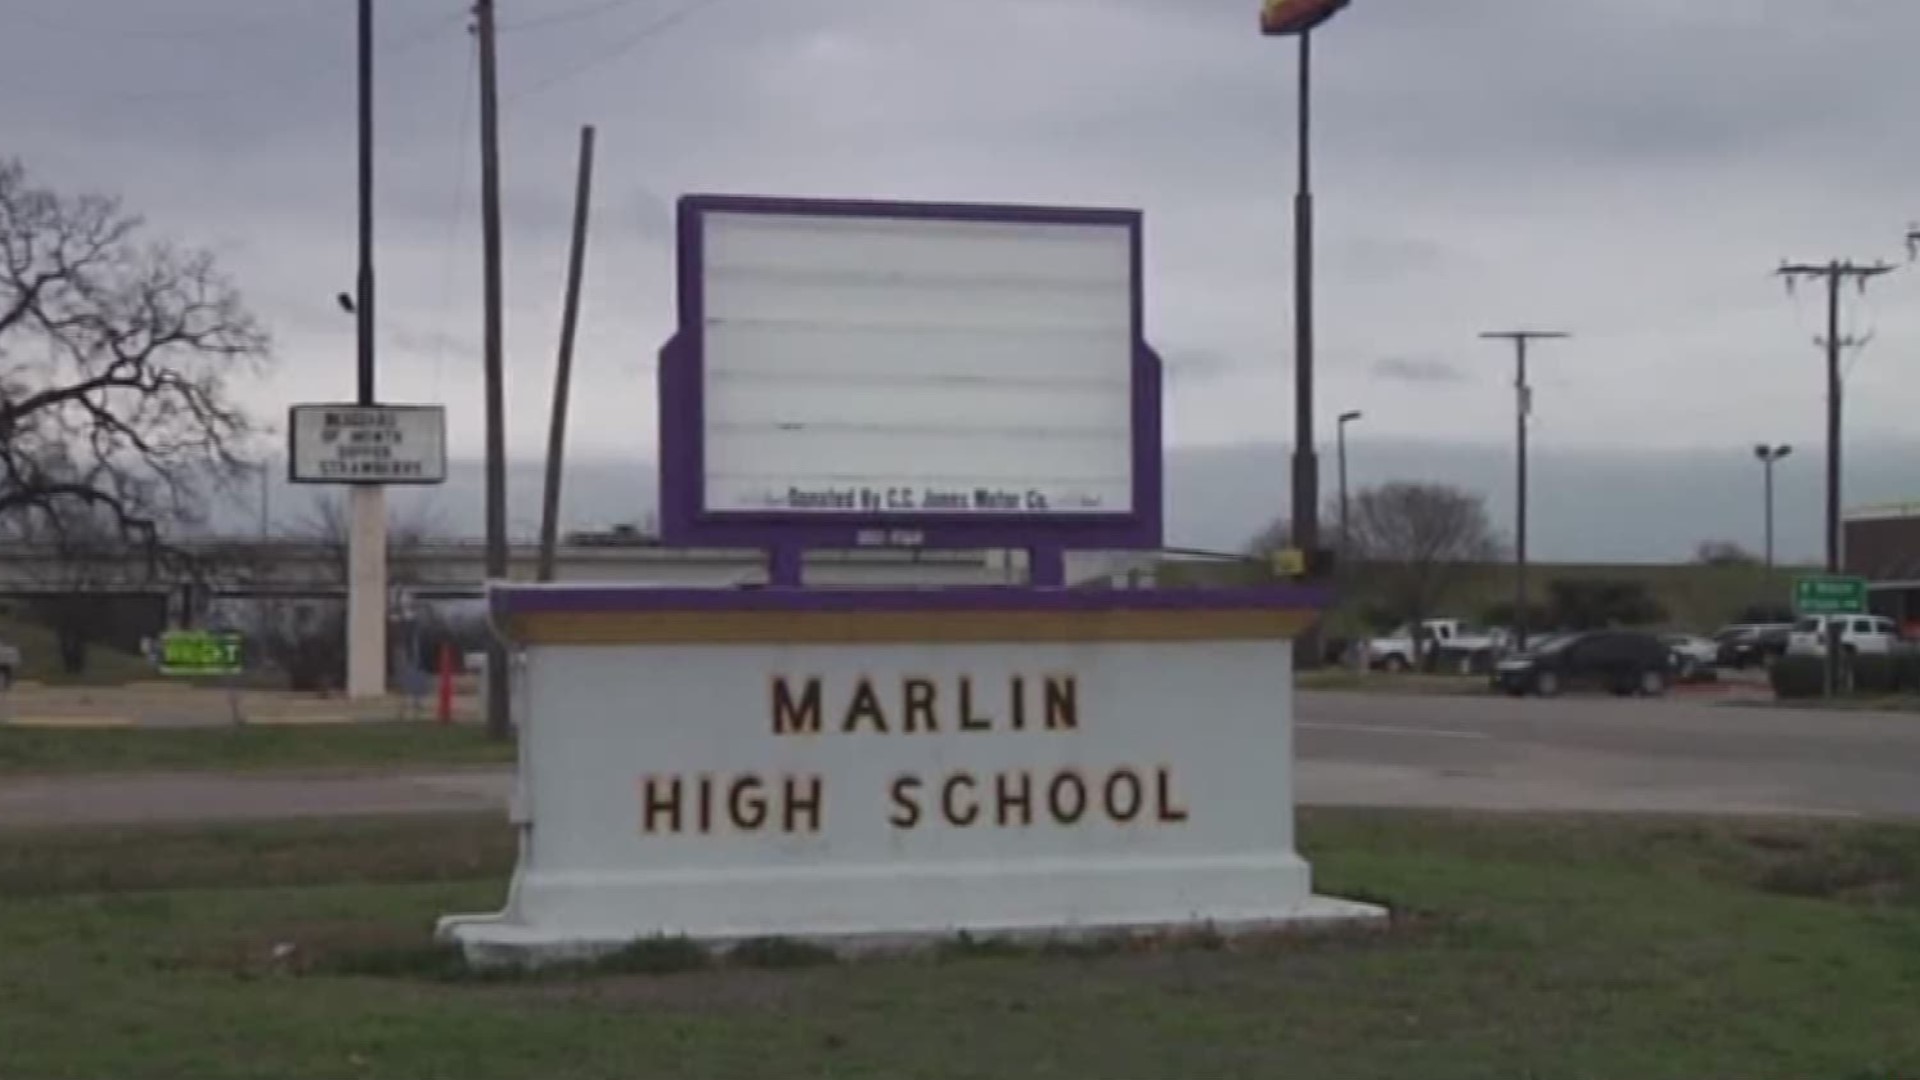 The city of Marlin issued a boil water order Tuesday after a "major main waterline break," the city said on its Facebook page.